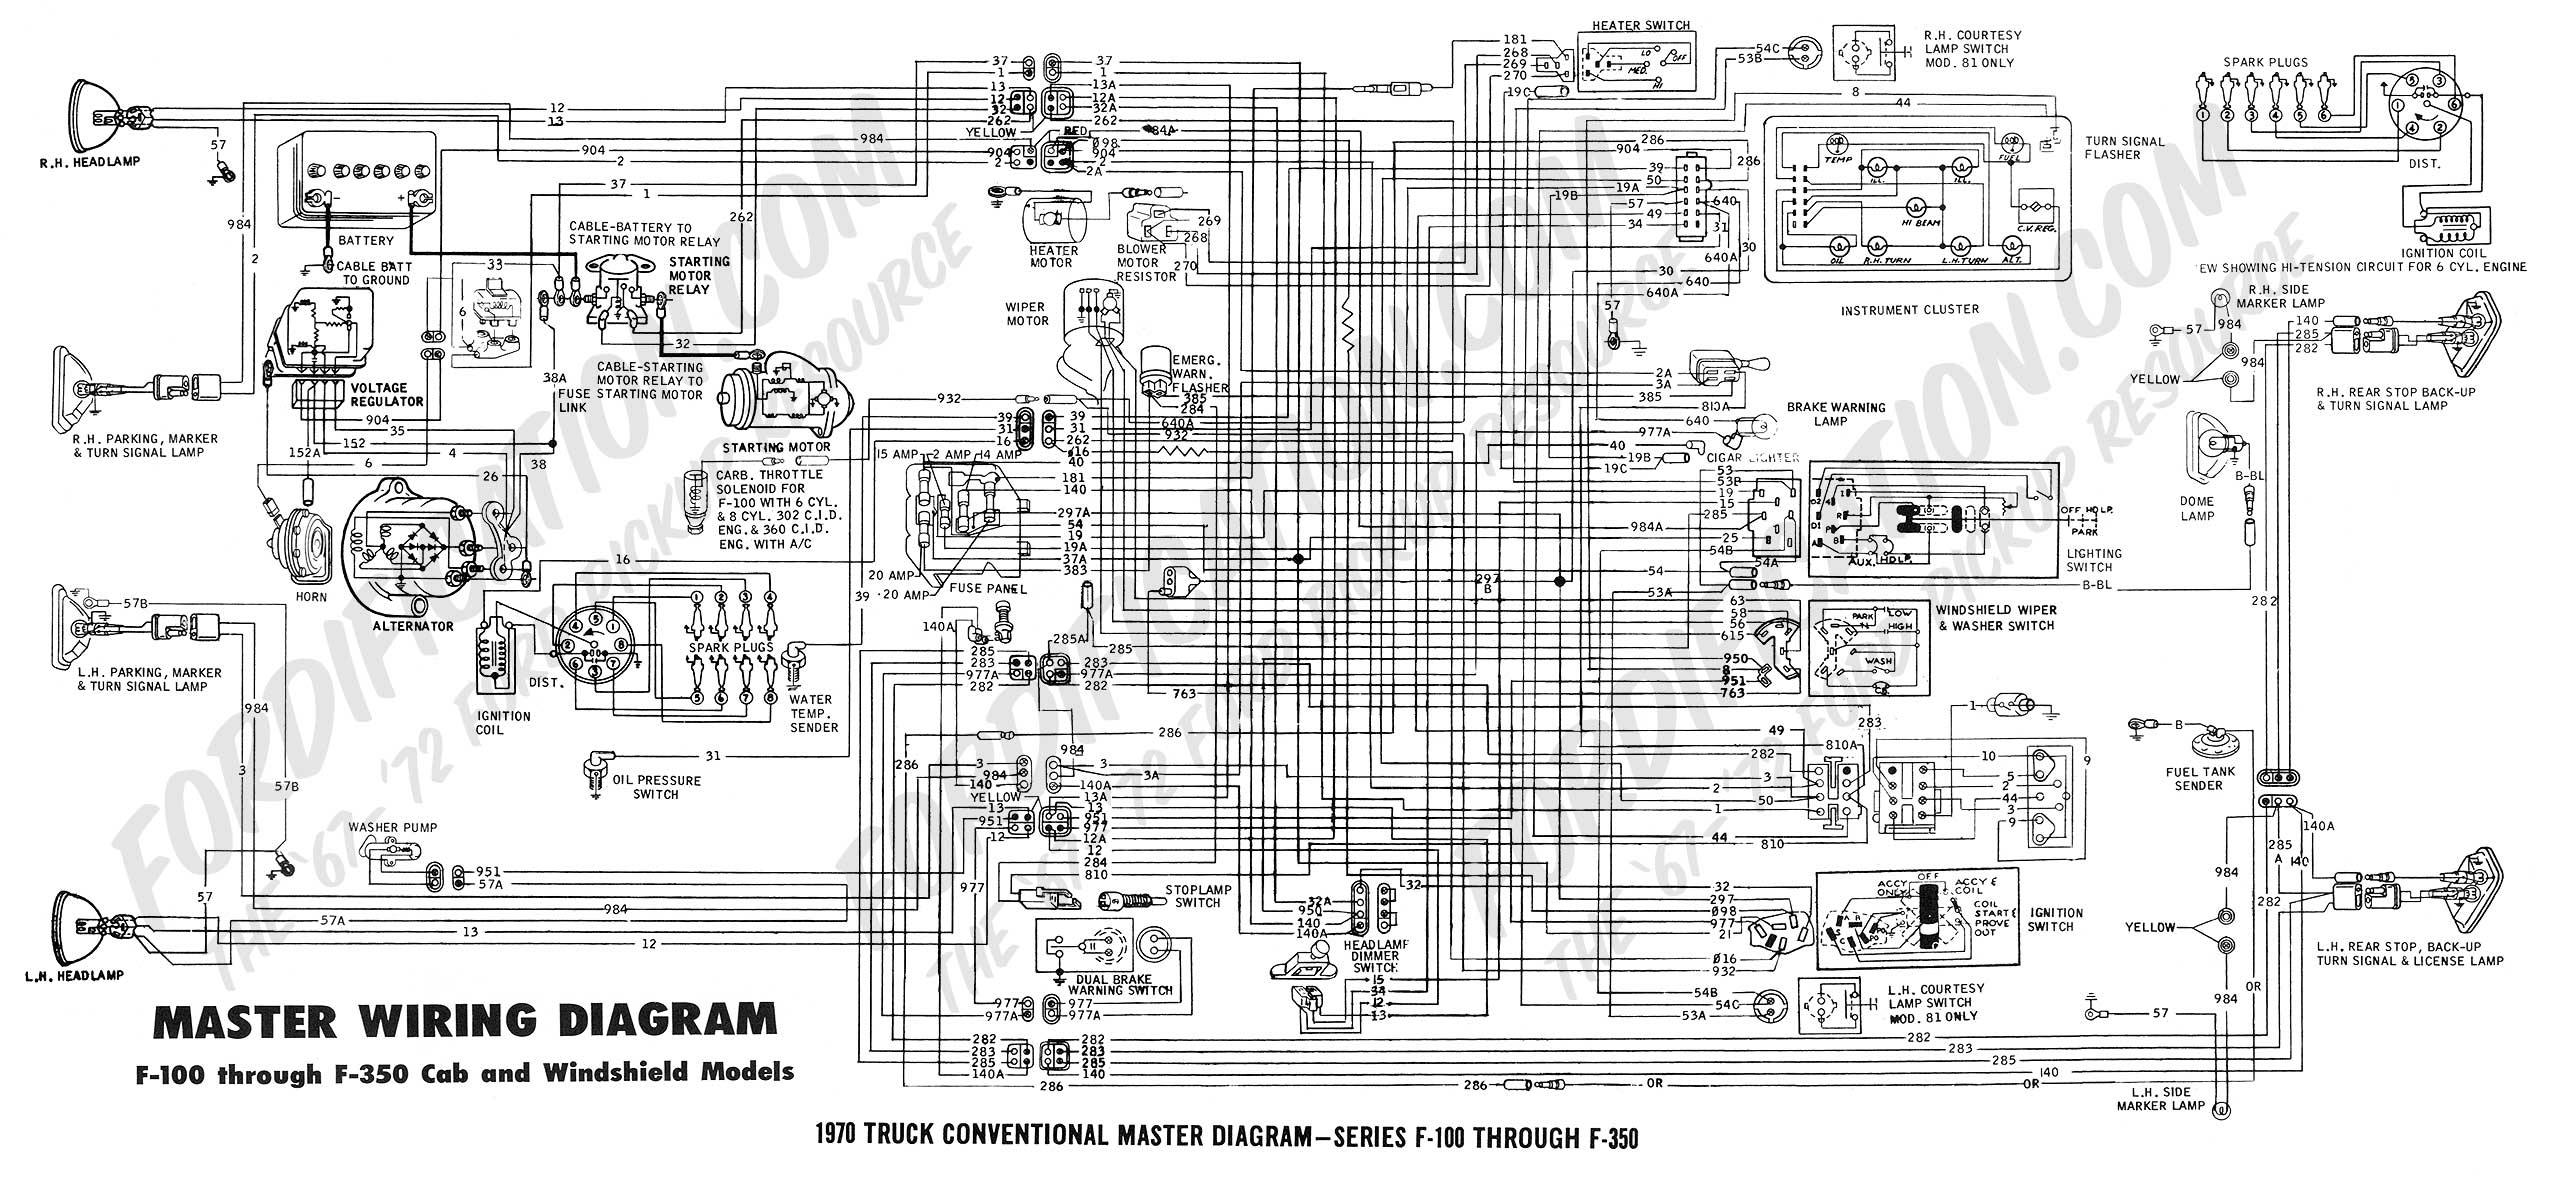 Ford 2004 Injector Wiring Diagram 6 0 Diesel Wire Colors | Wiring - 6 Wire Trailer Wiring Diagram